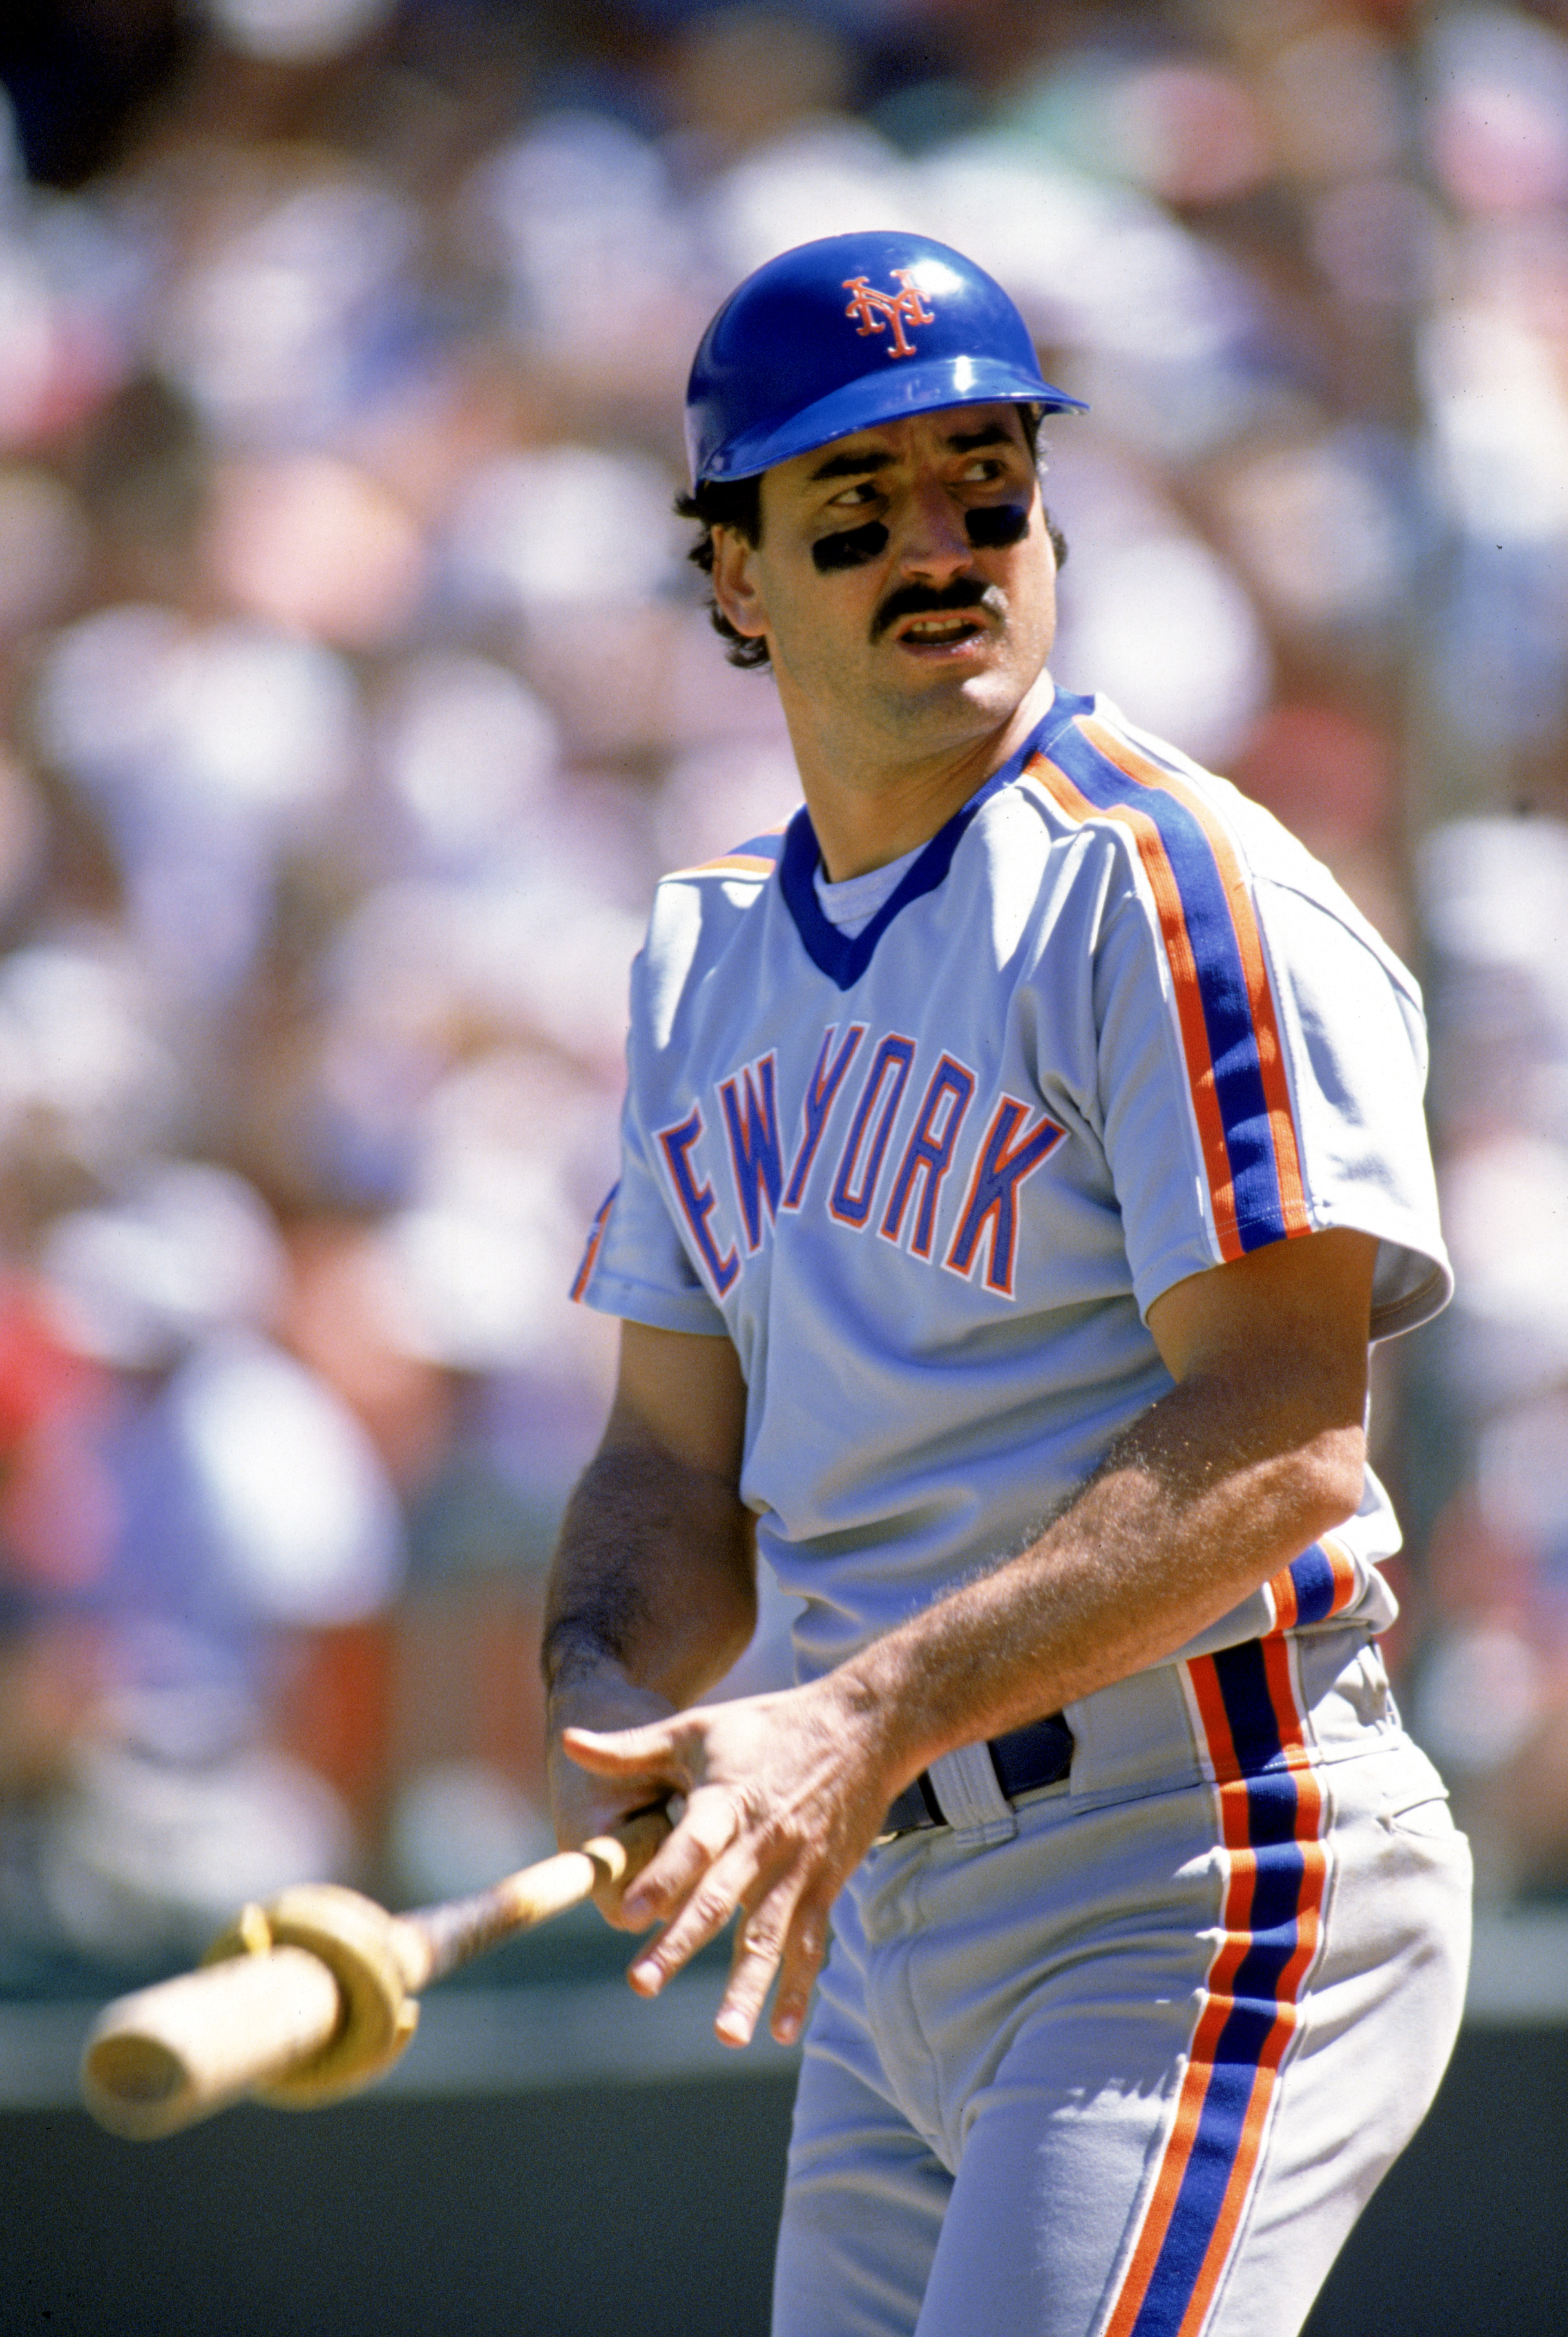 1989:  Keith Hernandez of the New York Mets gets ready to bat during a game in the 1989 season. ( Photo by: Otto Greule Jr/Getty Images)